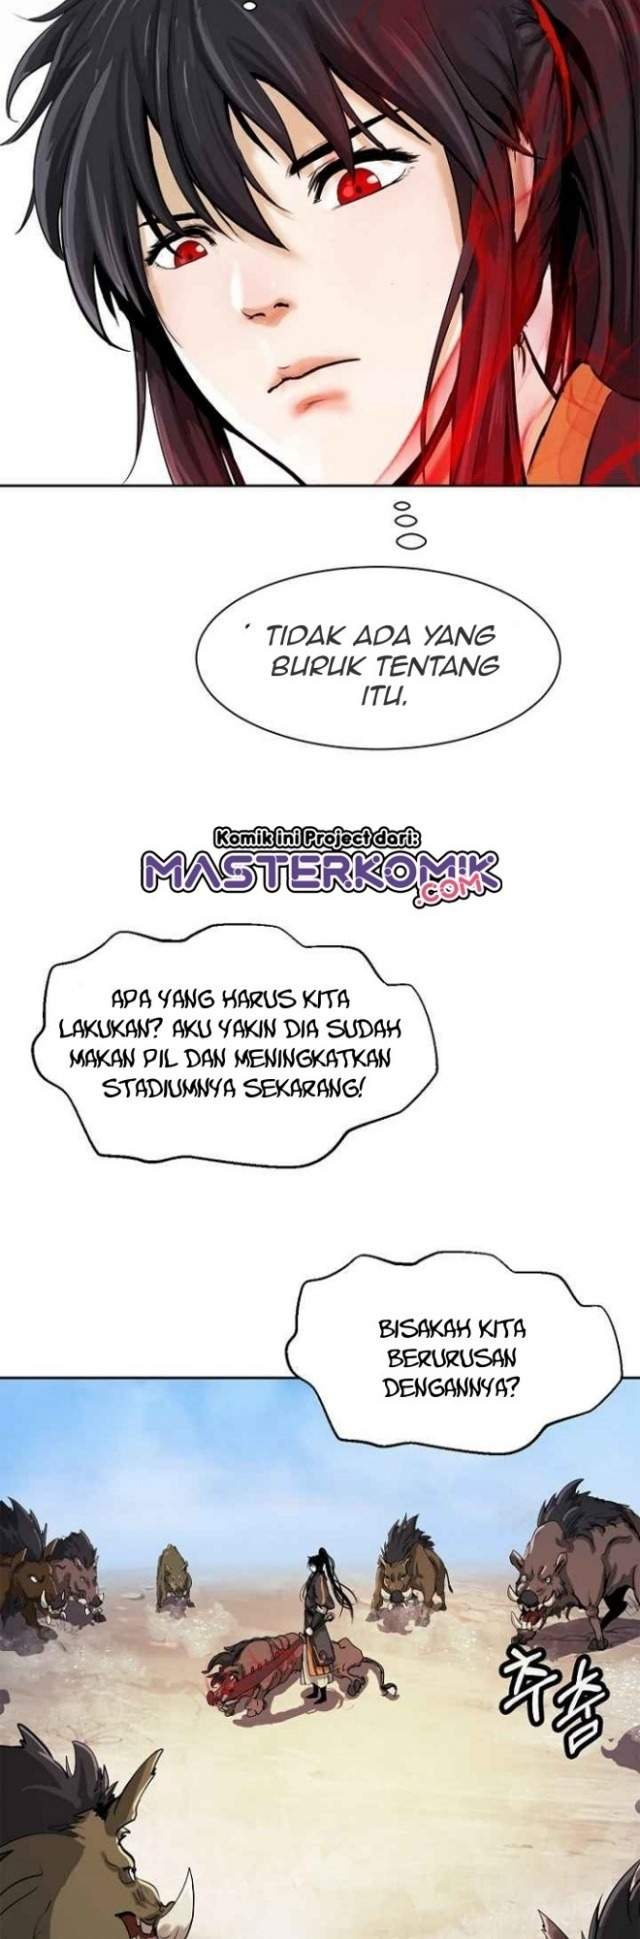 Cystic Story Chapter 15